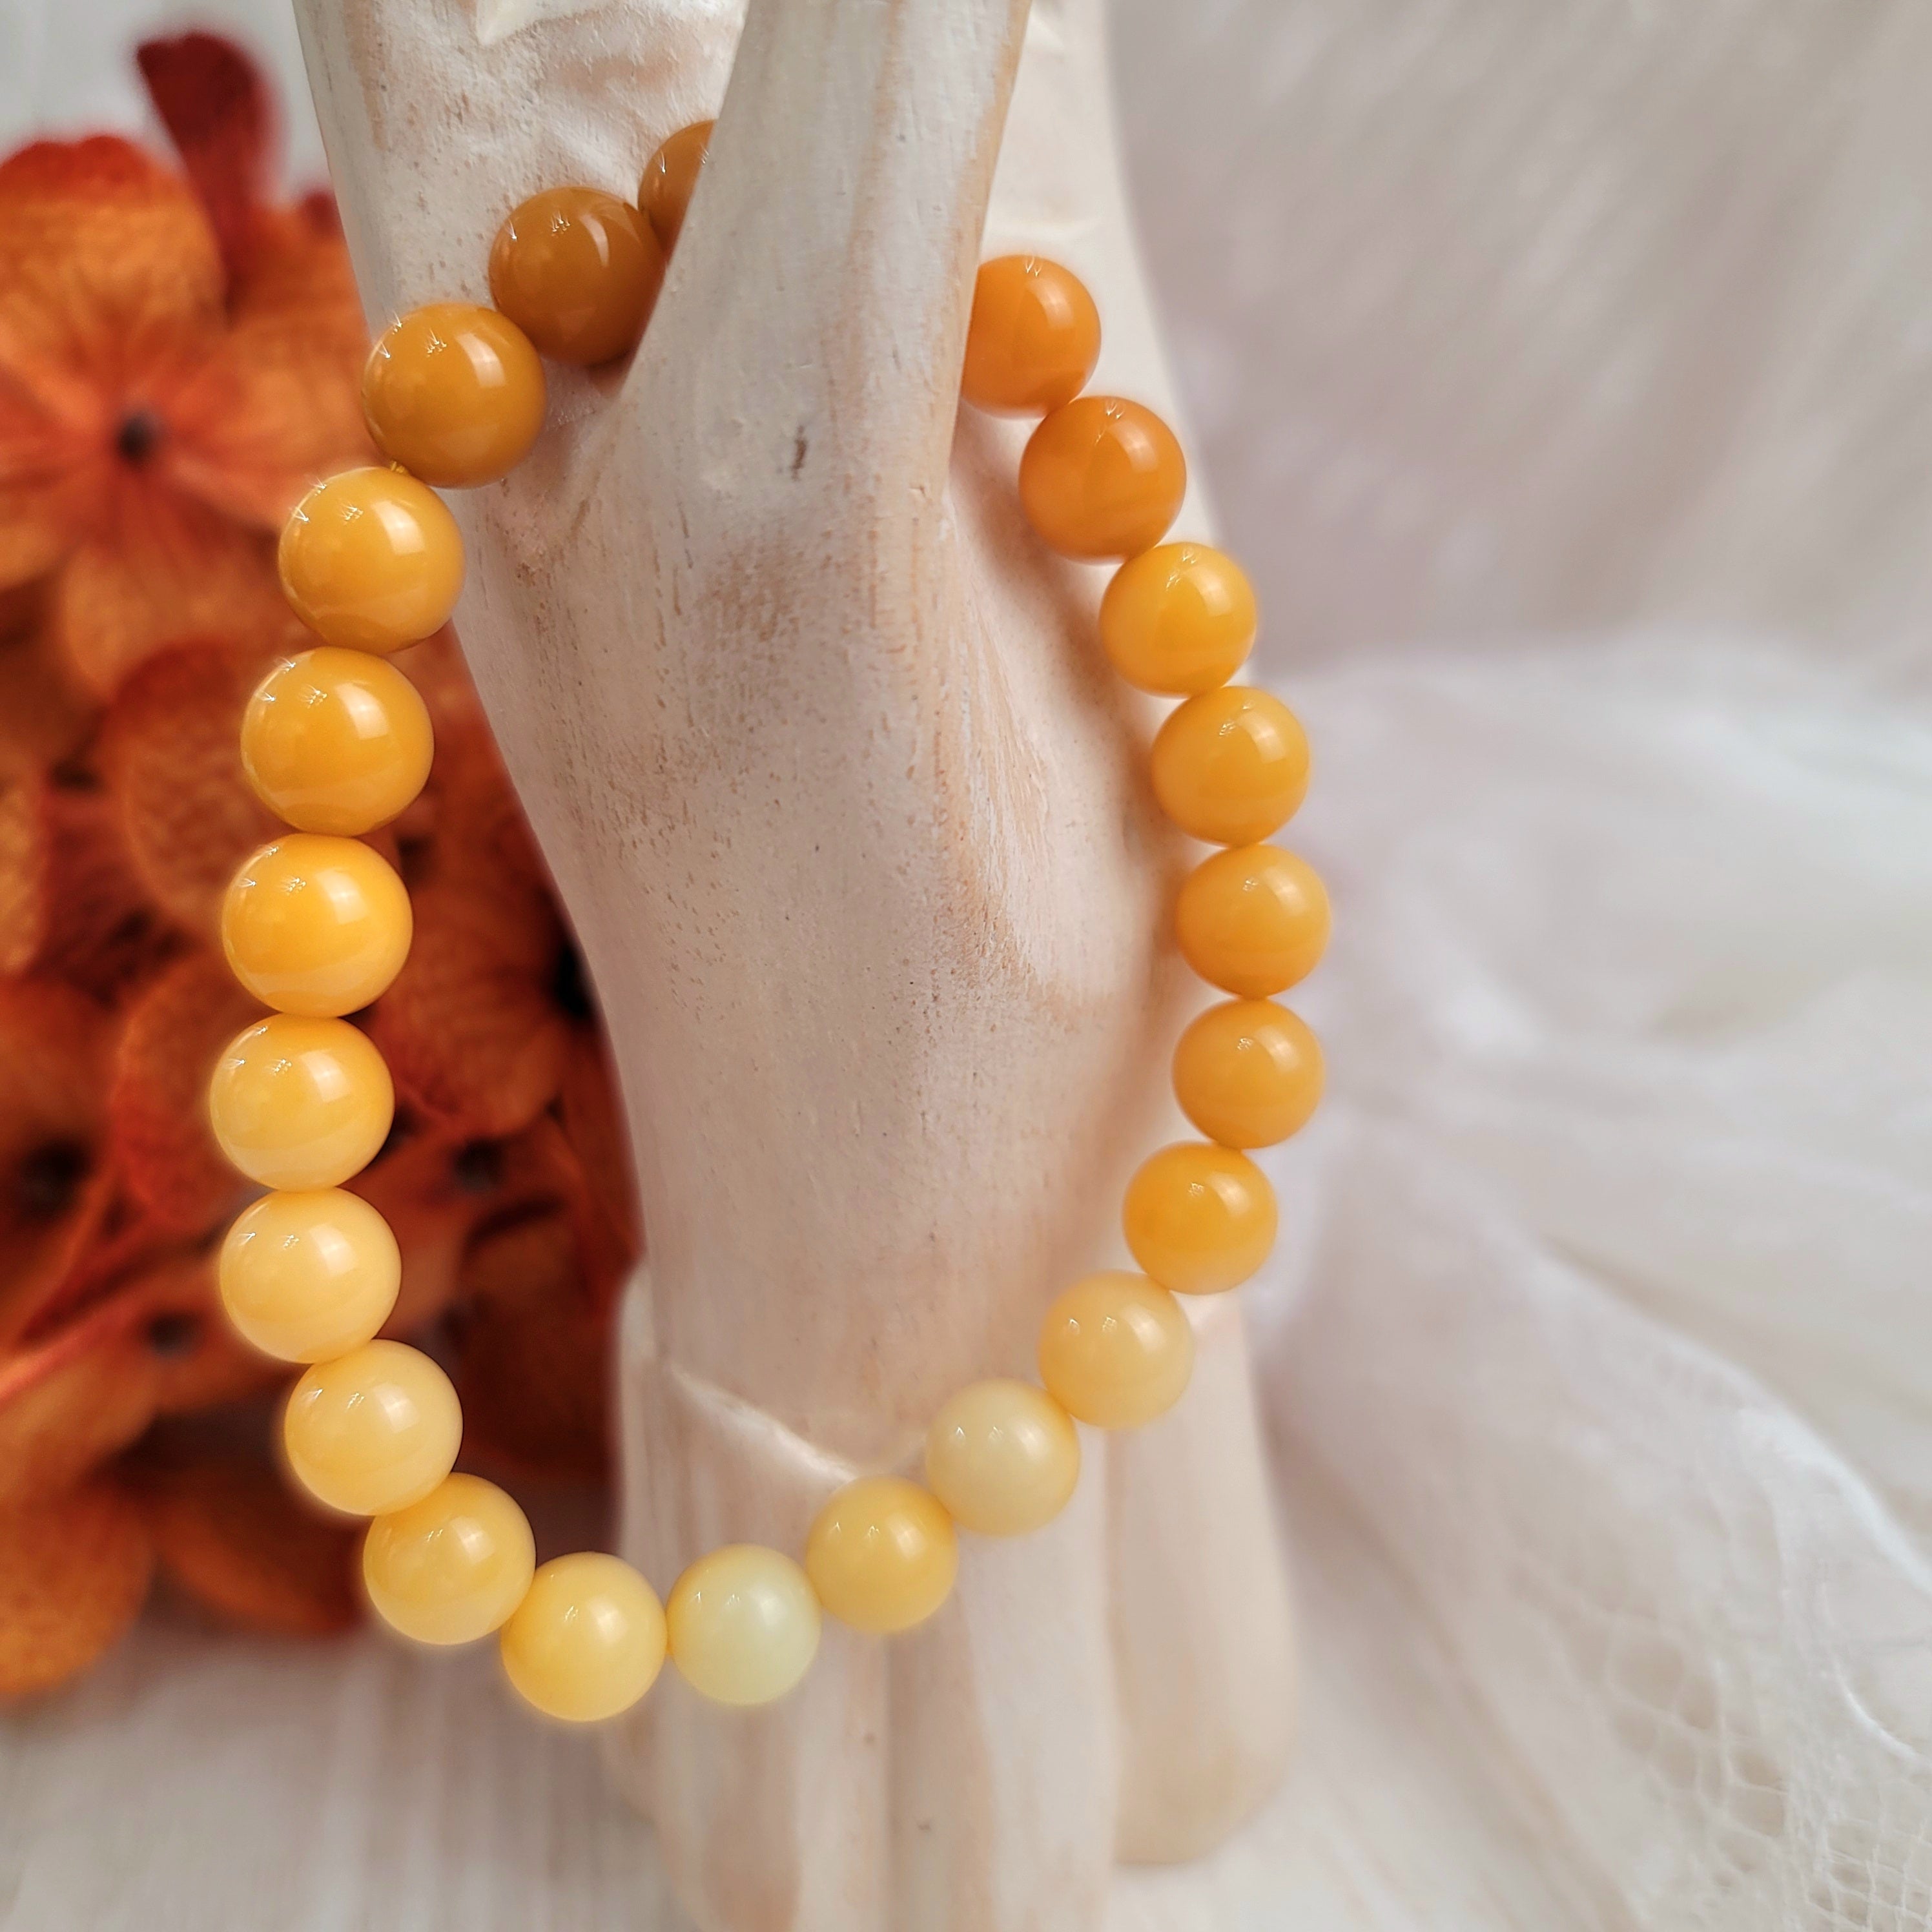 Yellow Jade Waterfall Bracelet (High Quality) for Love, Peace and Success Warmth and Joy